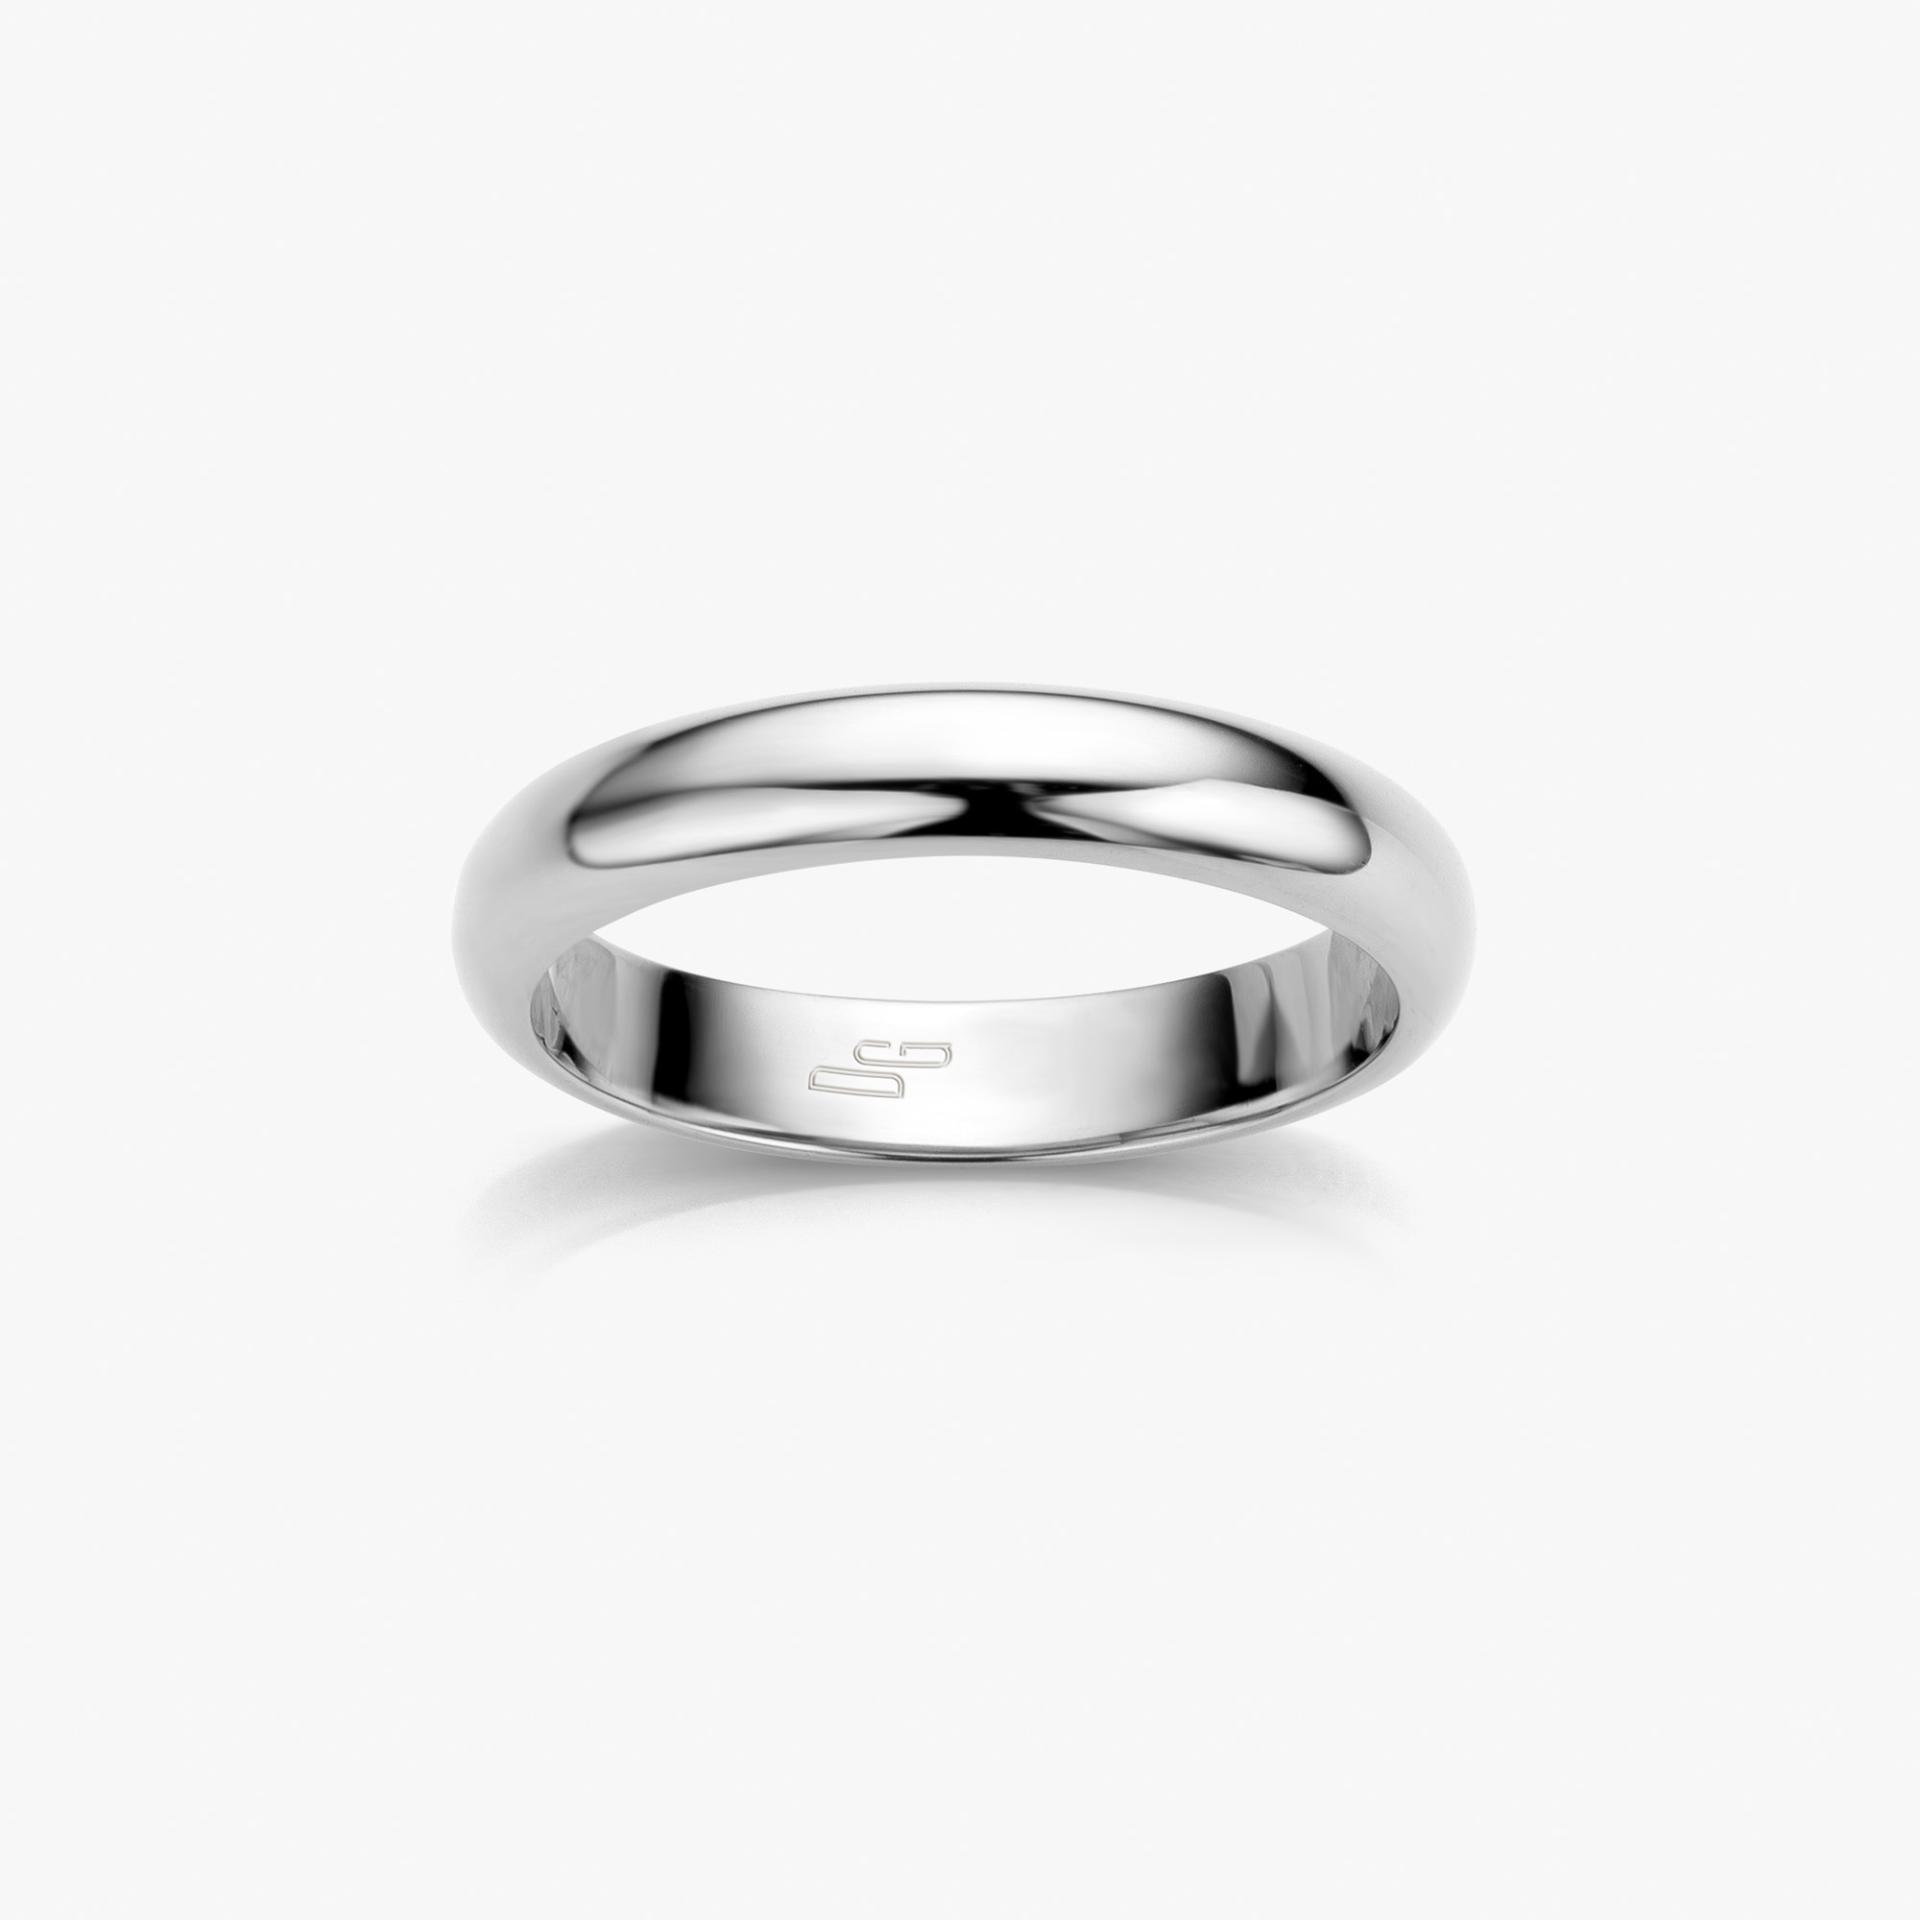 Wedding ring classic model made by Maison De Greef